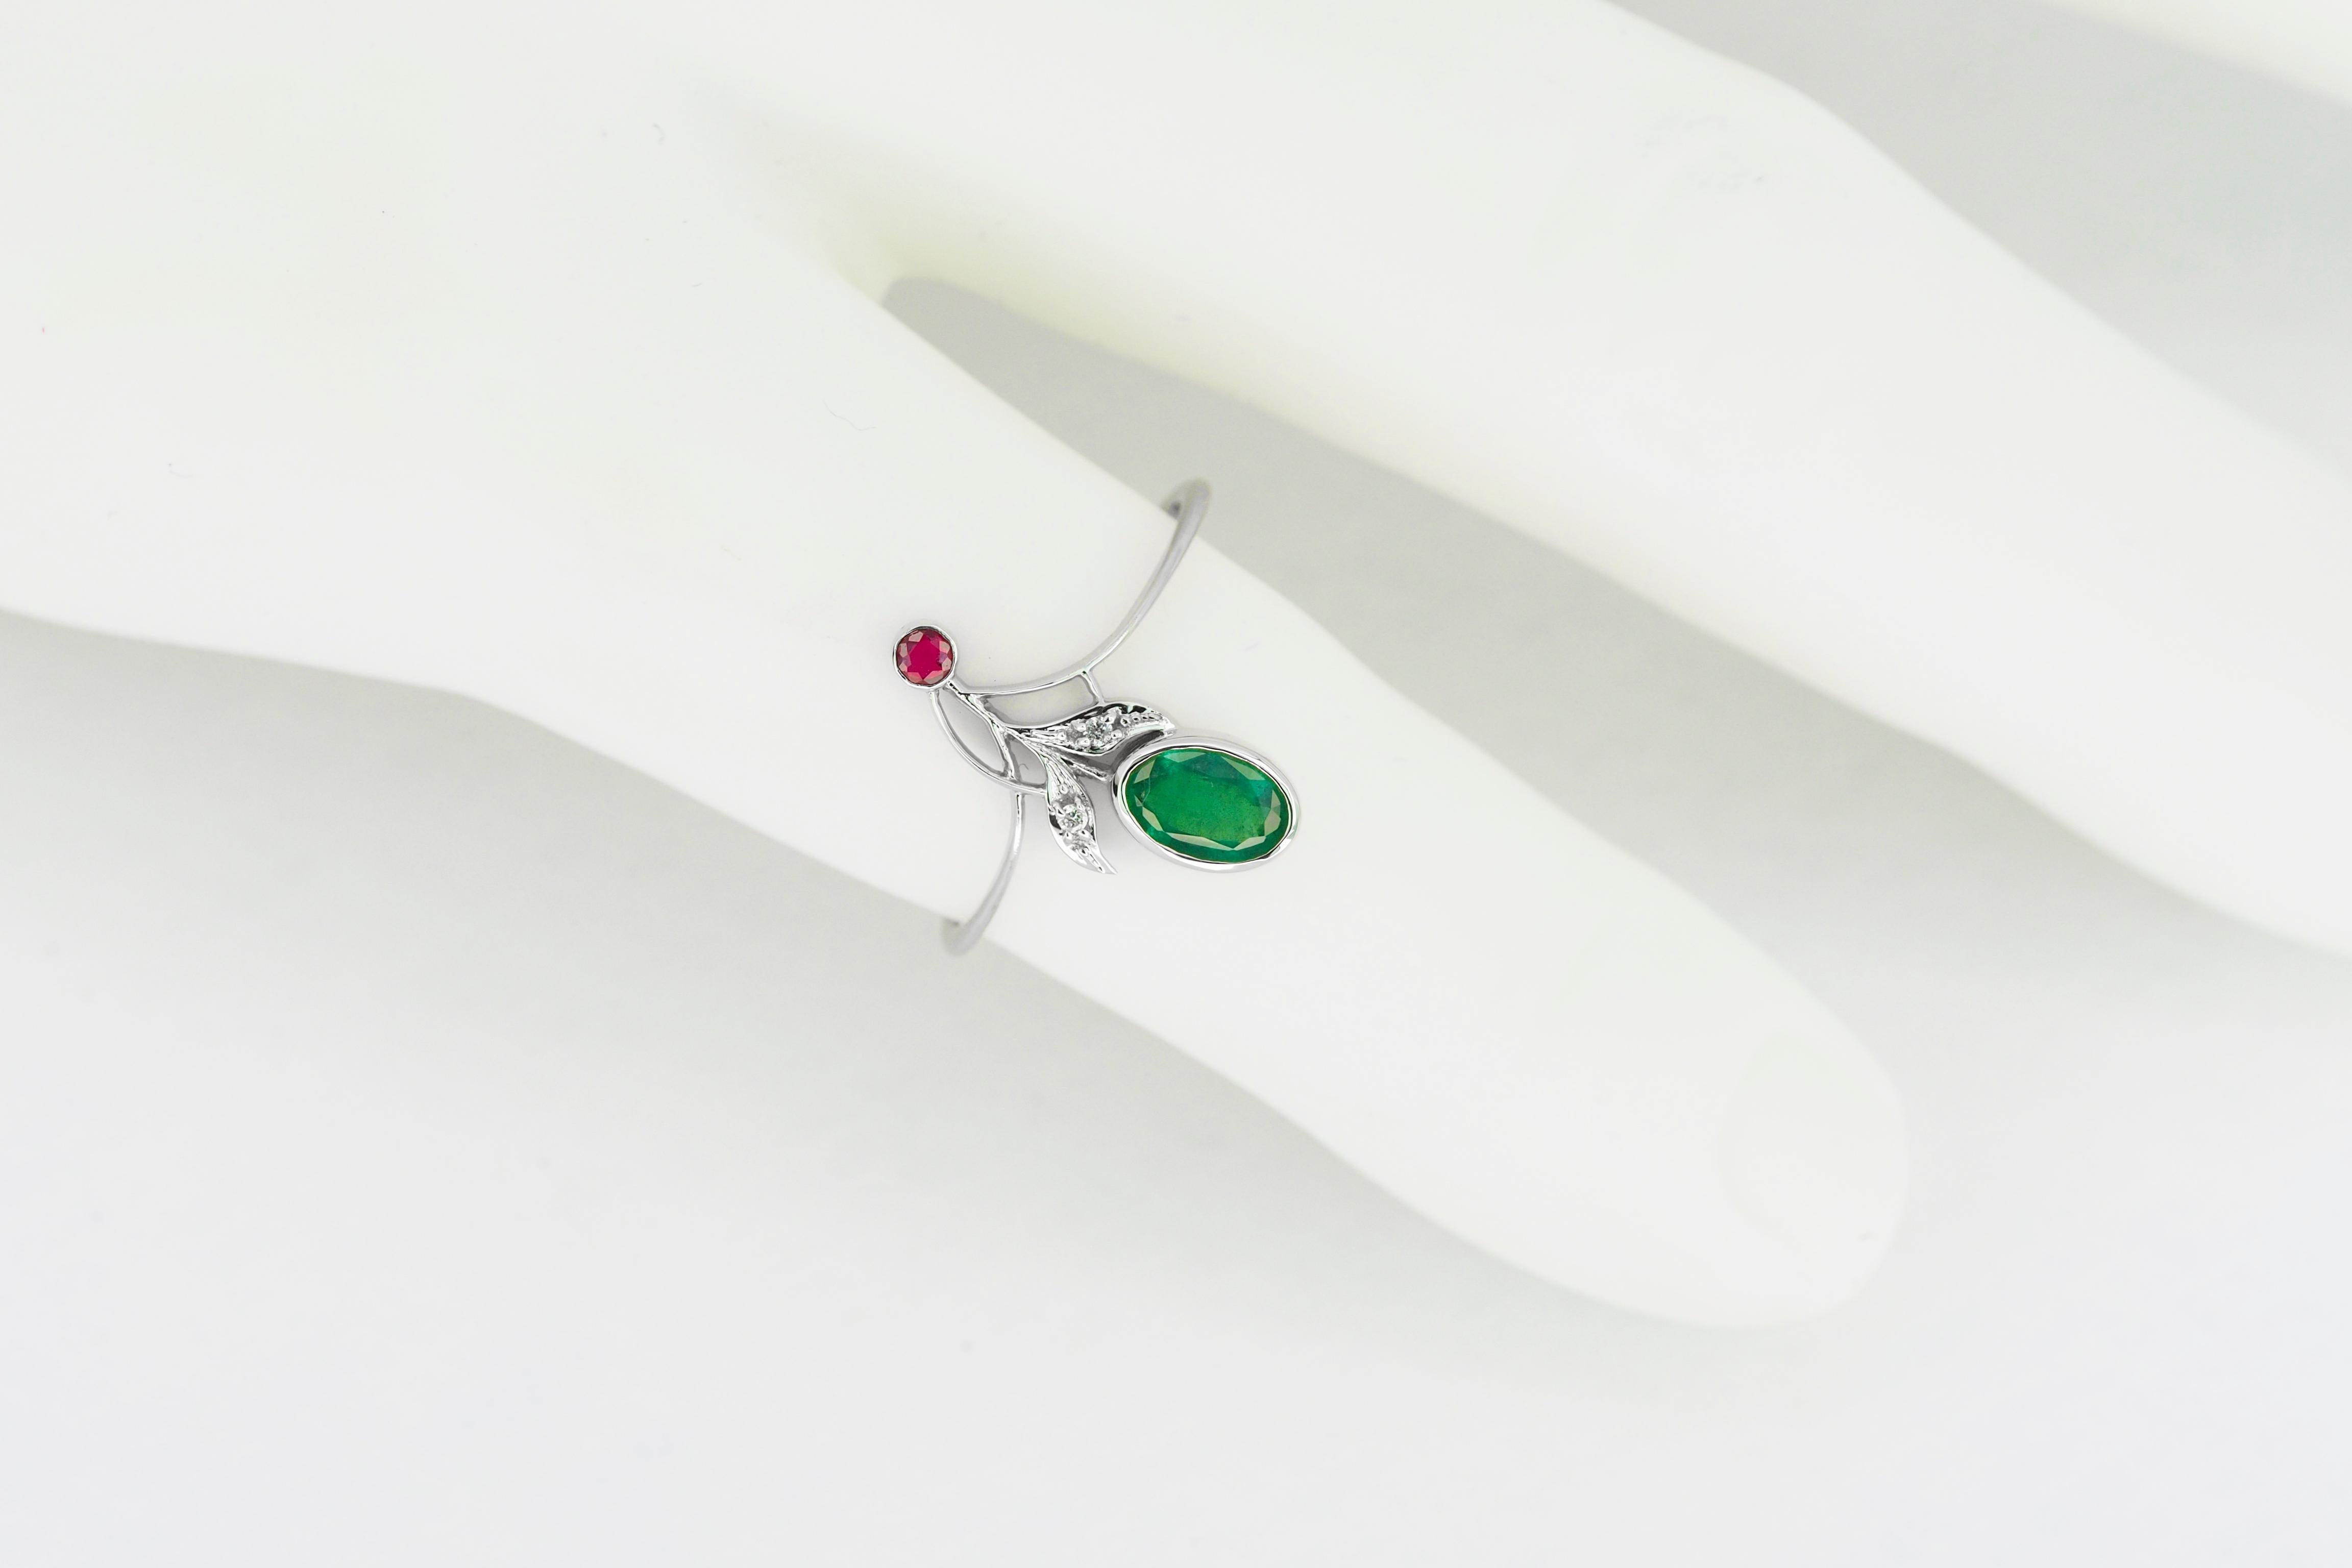 14k gold ring with emerald, ruby and diamonds

14 k gold
total weight 1.6 gr

Gemstones (all are tested by proffesional gemmologist)
Emerald: oval cut, 0.8 ct, transparent,  green color. 

Ruby: round cut, transparent, red color., 0.07 ct